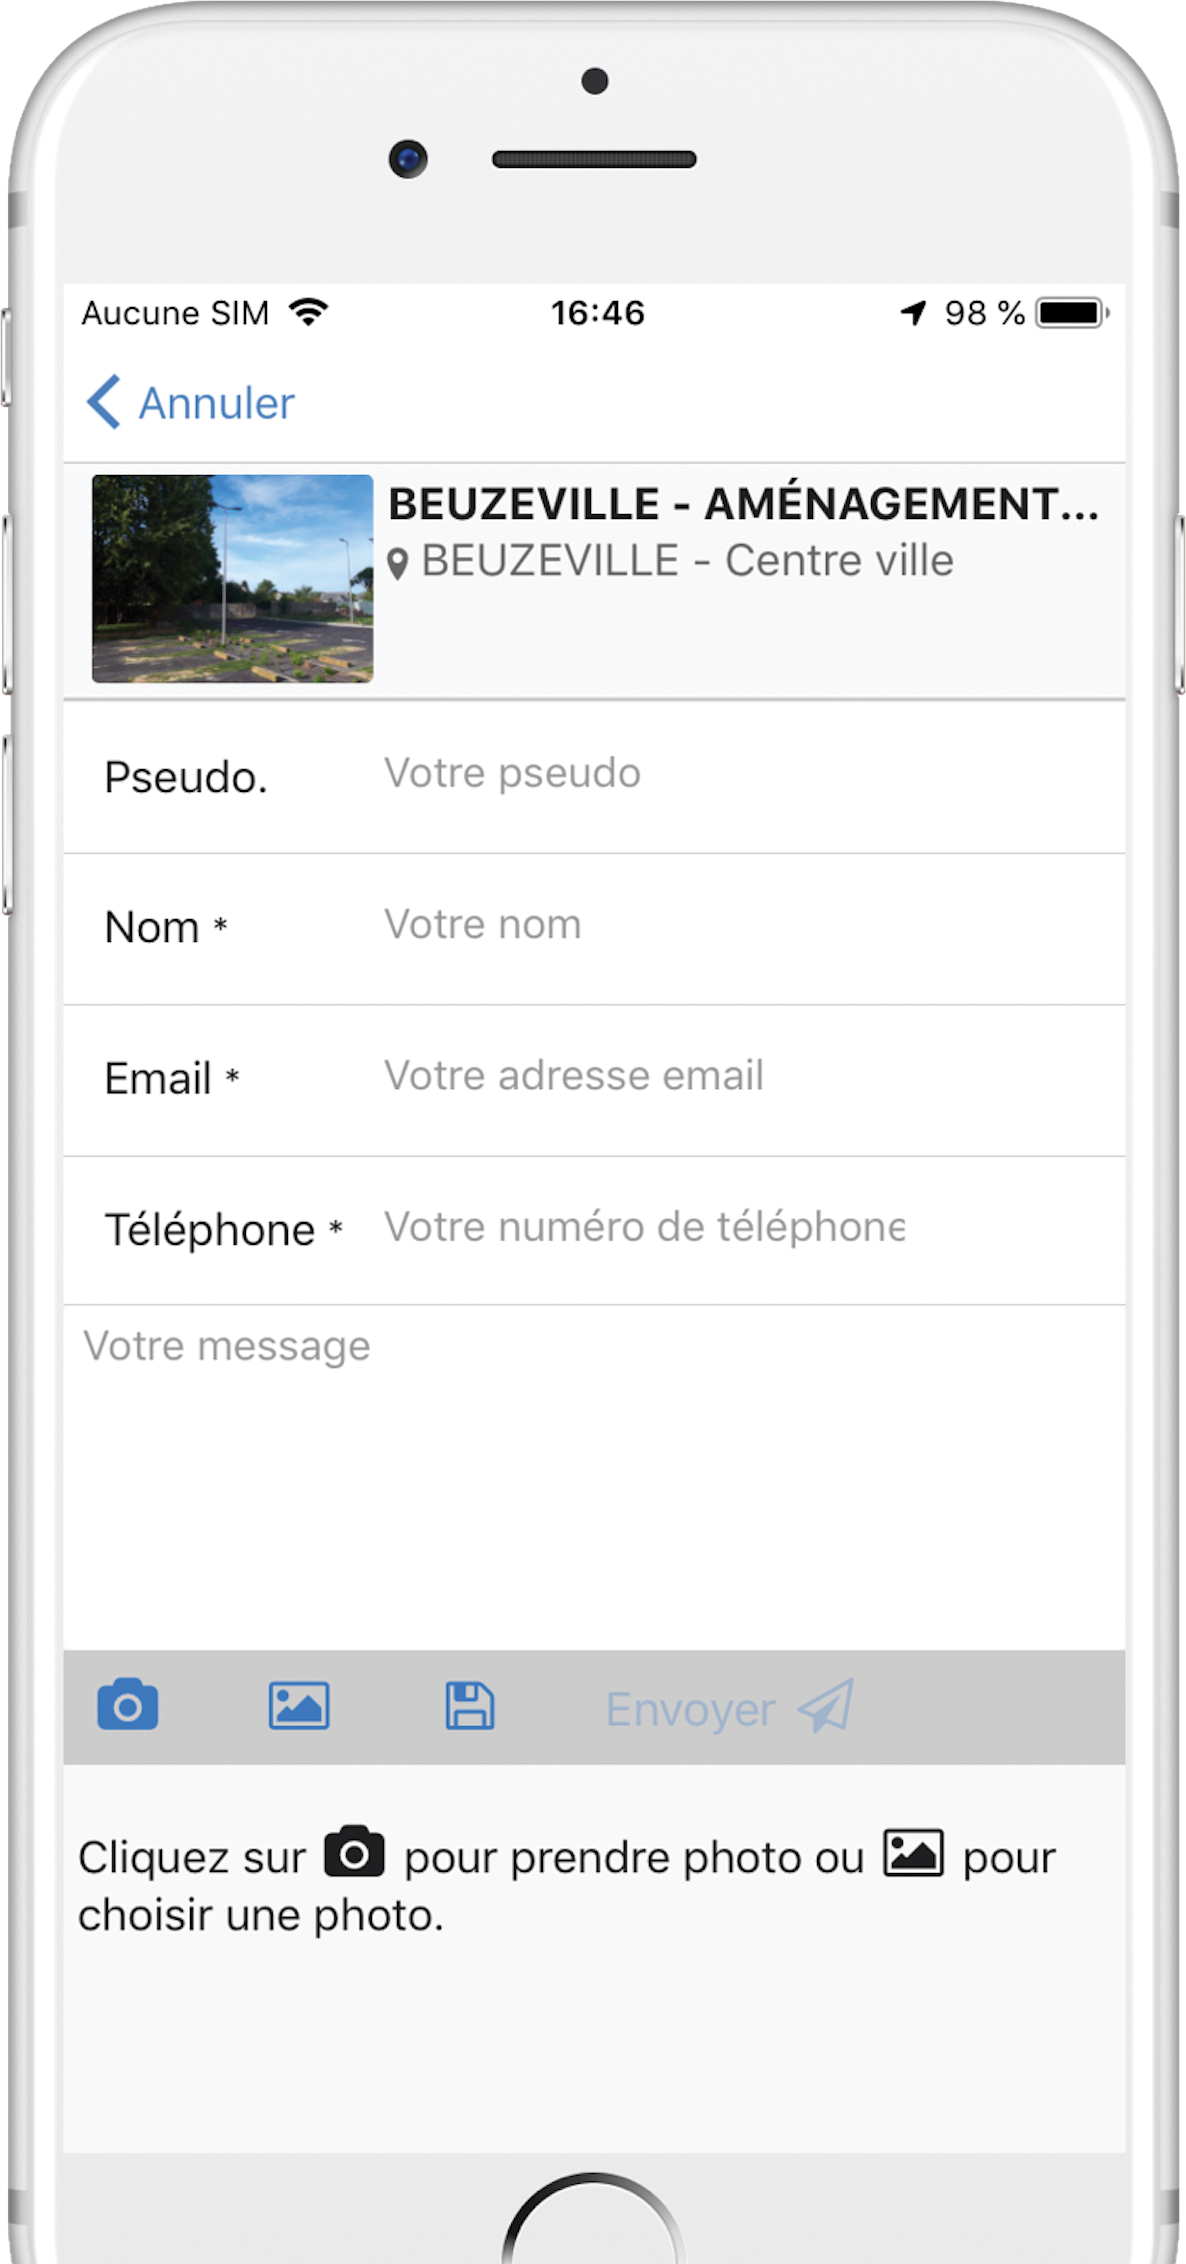 http://www.cquoictravaux.fr/storage/2019/09/iPhone2_footer.png